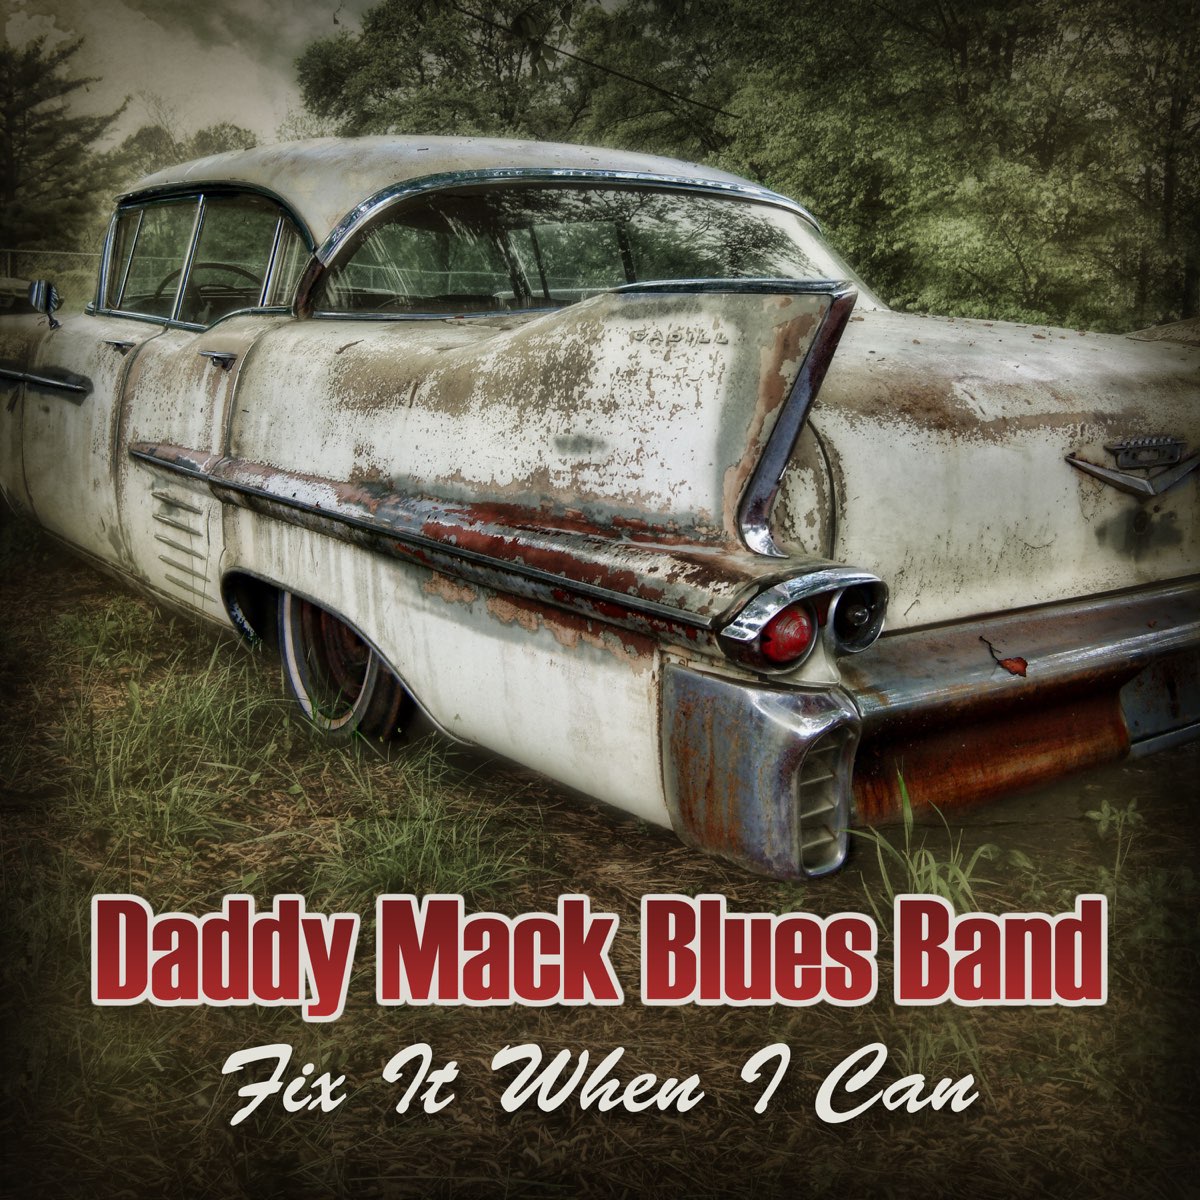 Daddy blues. Mack Daddy and. Эрл уалкер. Bad Daddy Blues Band. Chris Bell & 100% Blues Blues 2001.